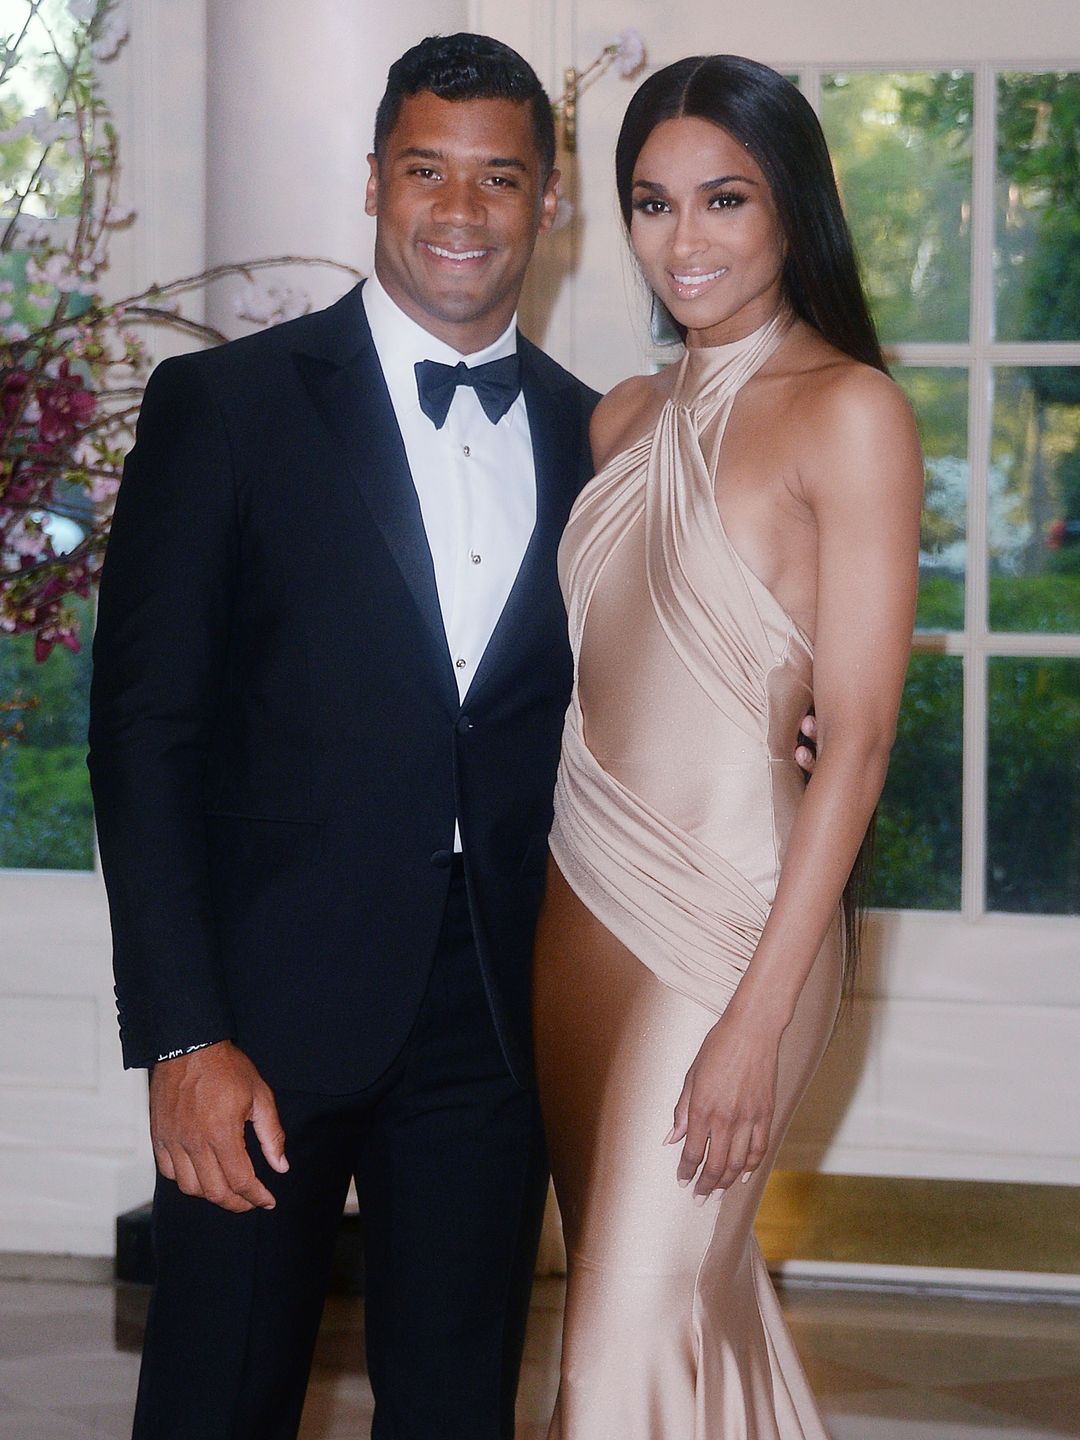 Ciara and Russell smile while wearing black tie attire